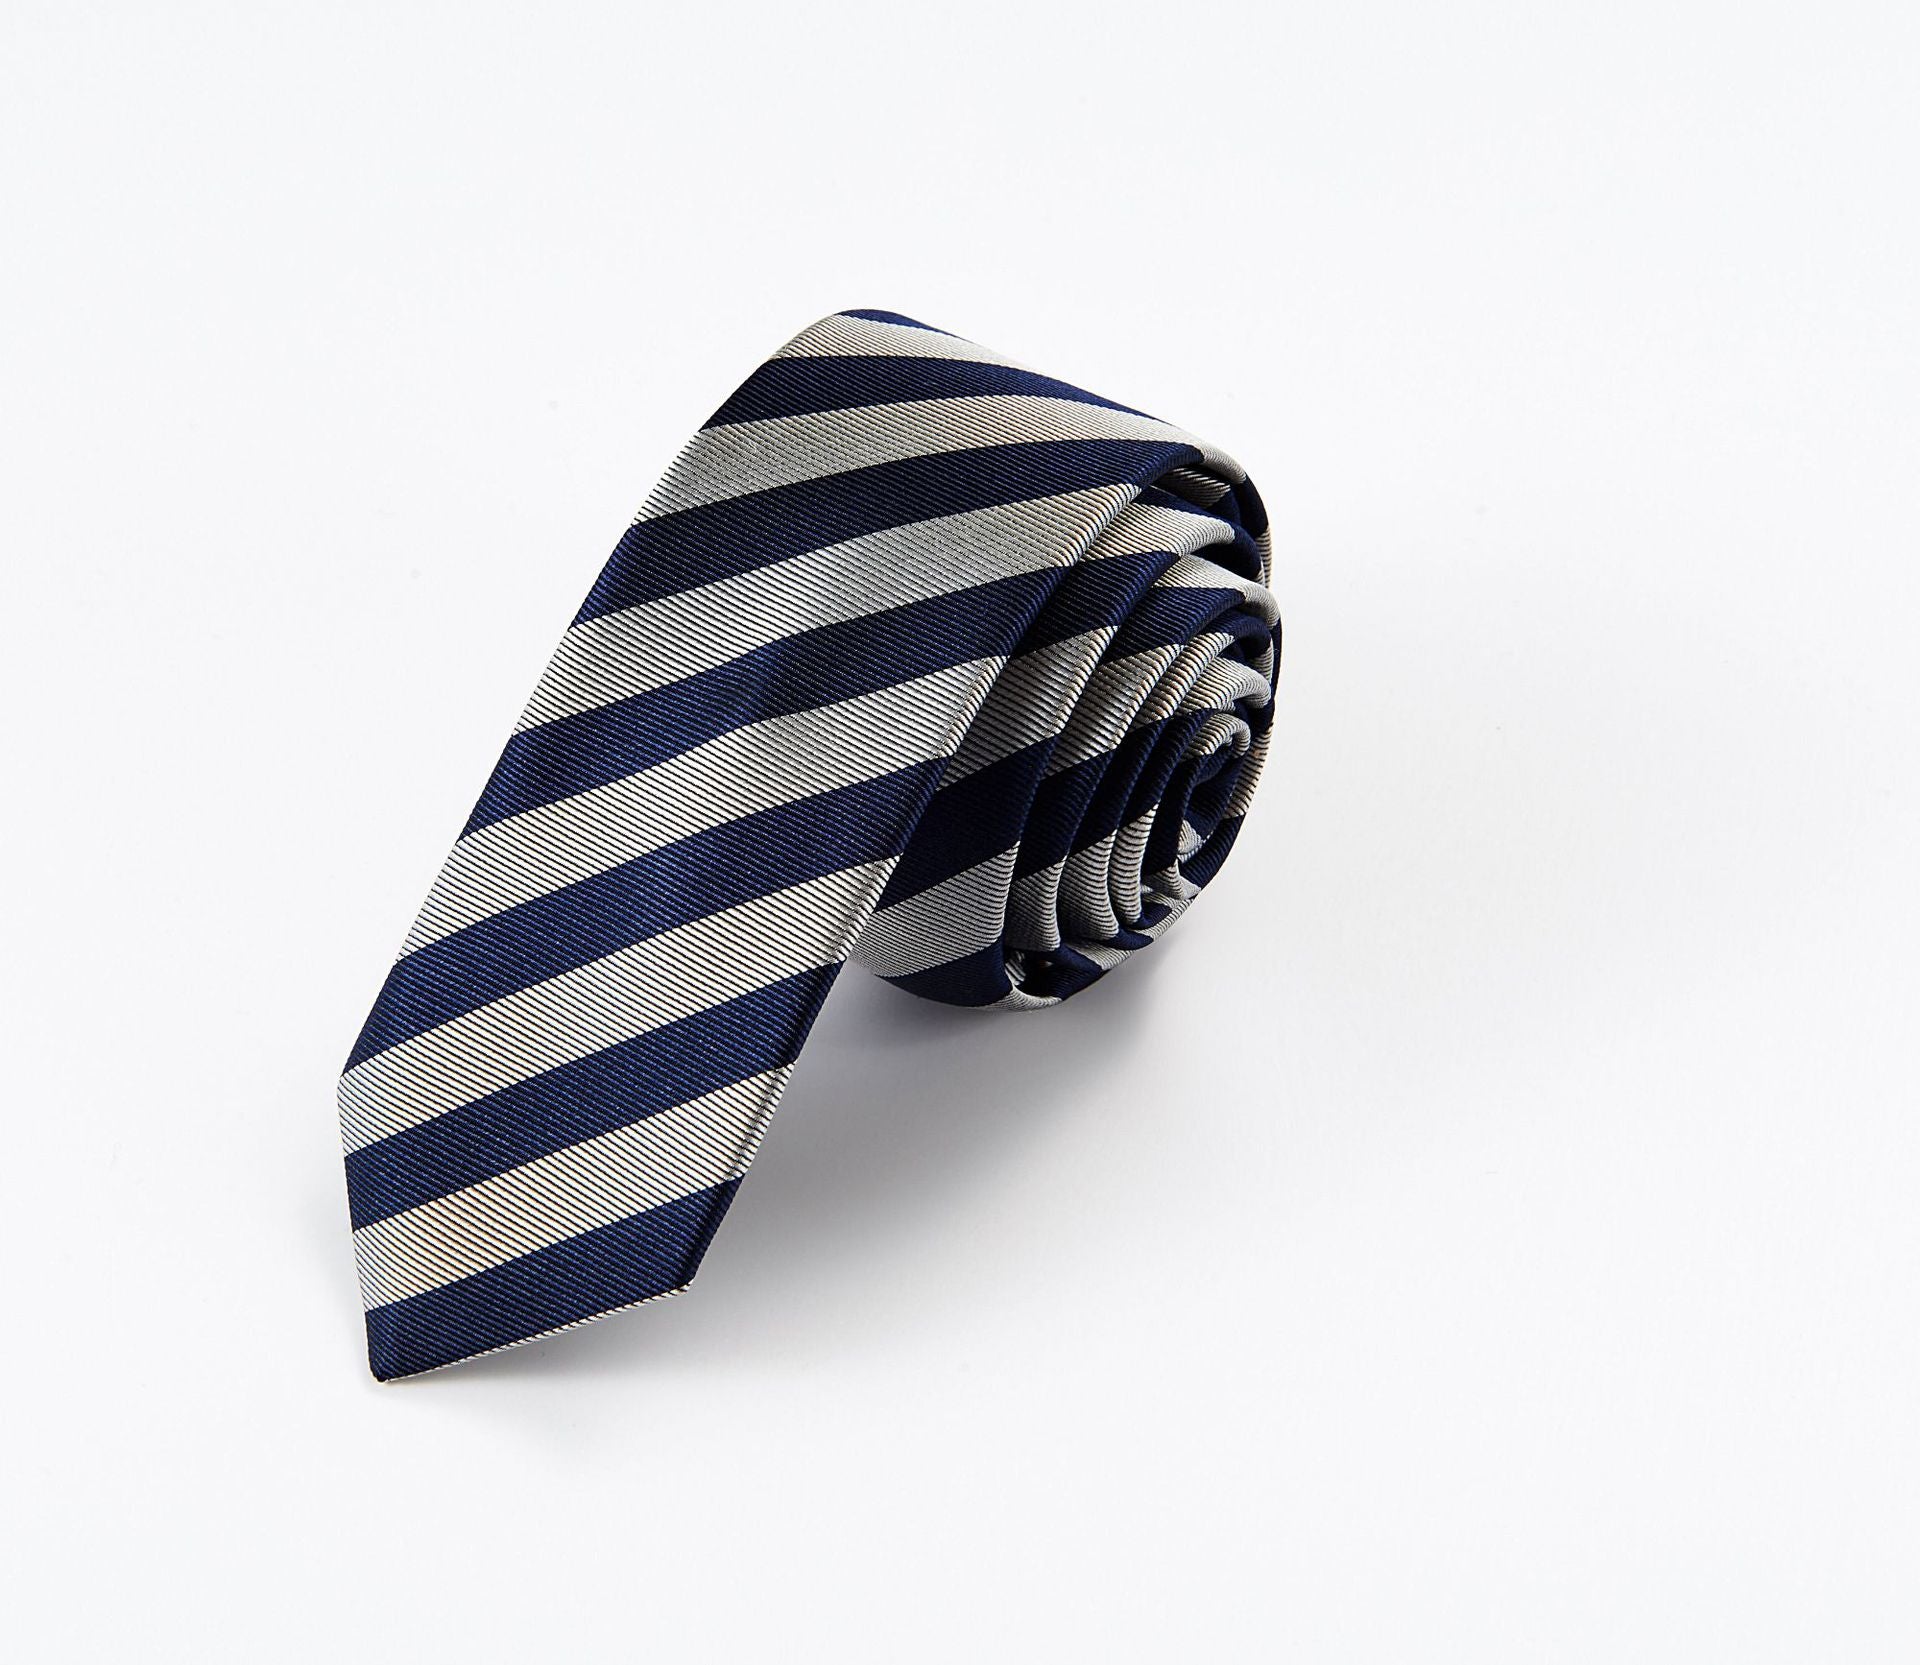 Spot Adult Black Male Hand Hitting Independent Packaging Striped Geometric Style Men's Casual Business Tie Customization